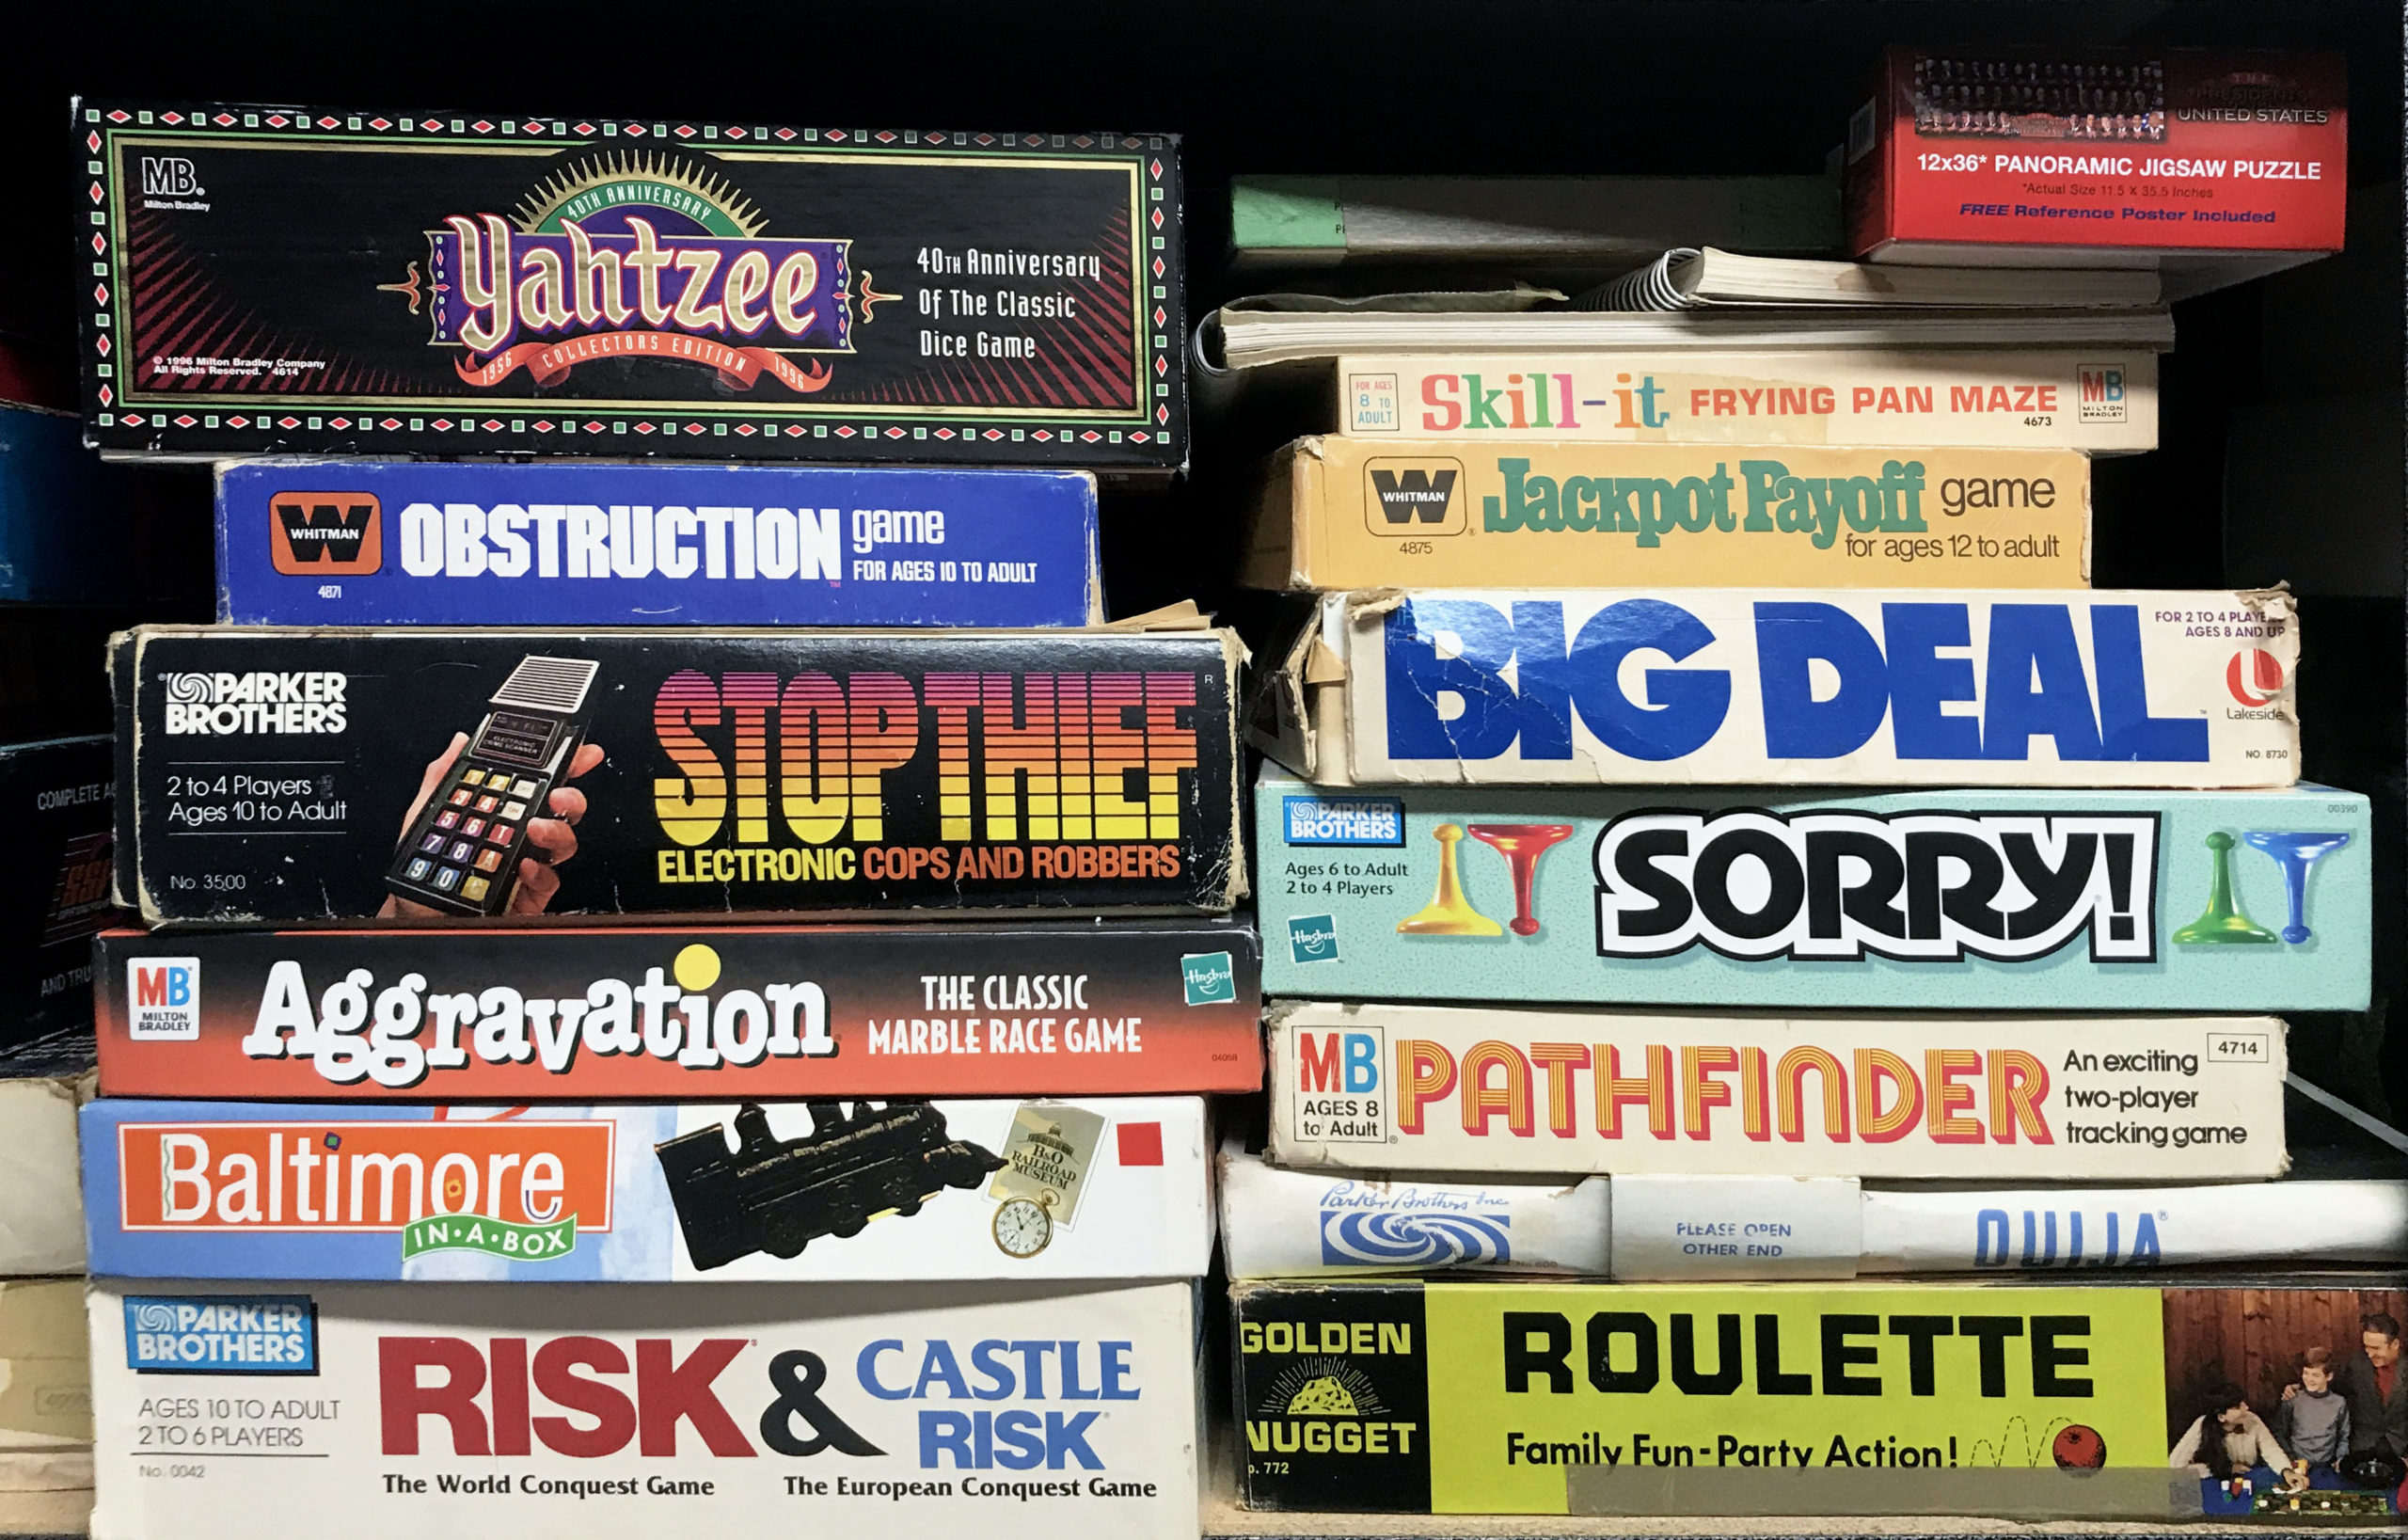 October Photo Assignment – Board Games or Card Games